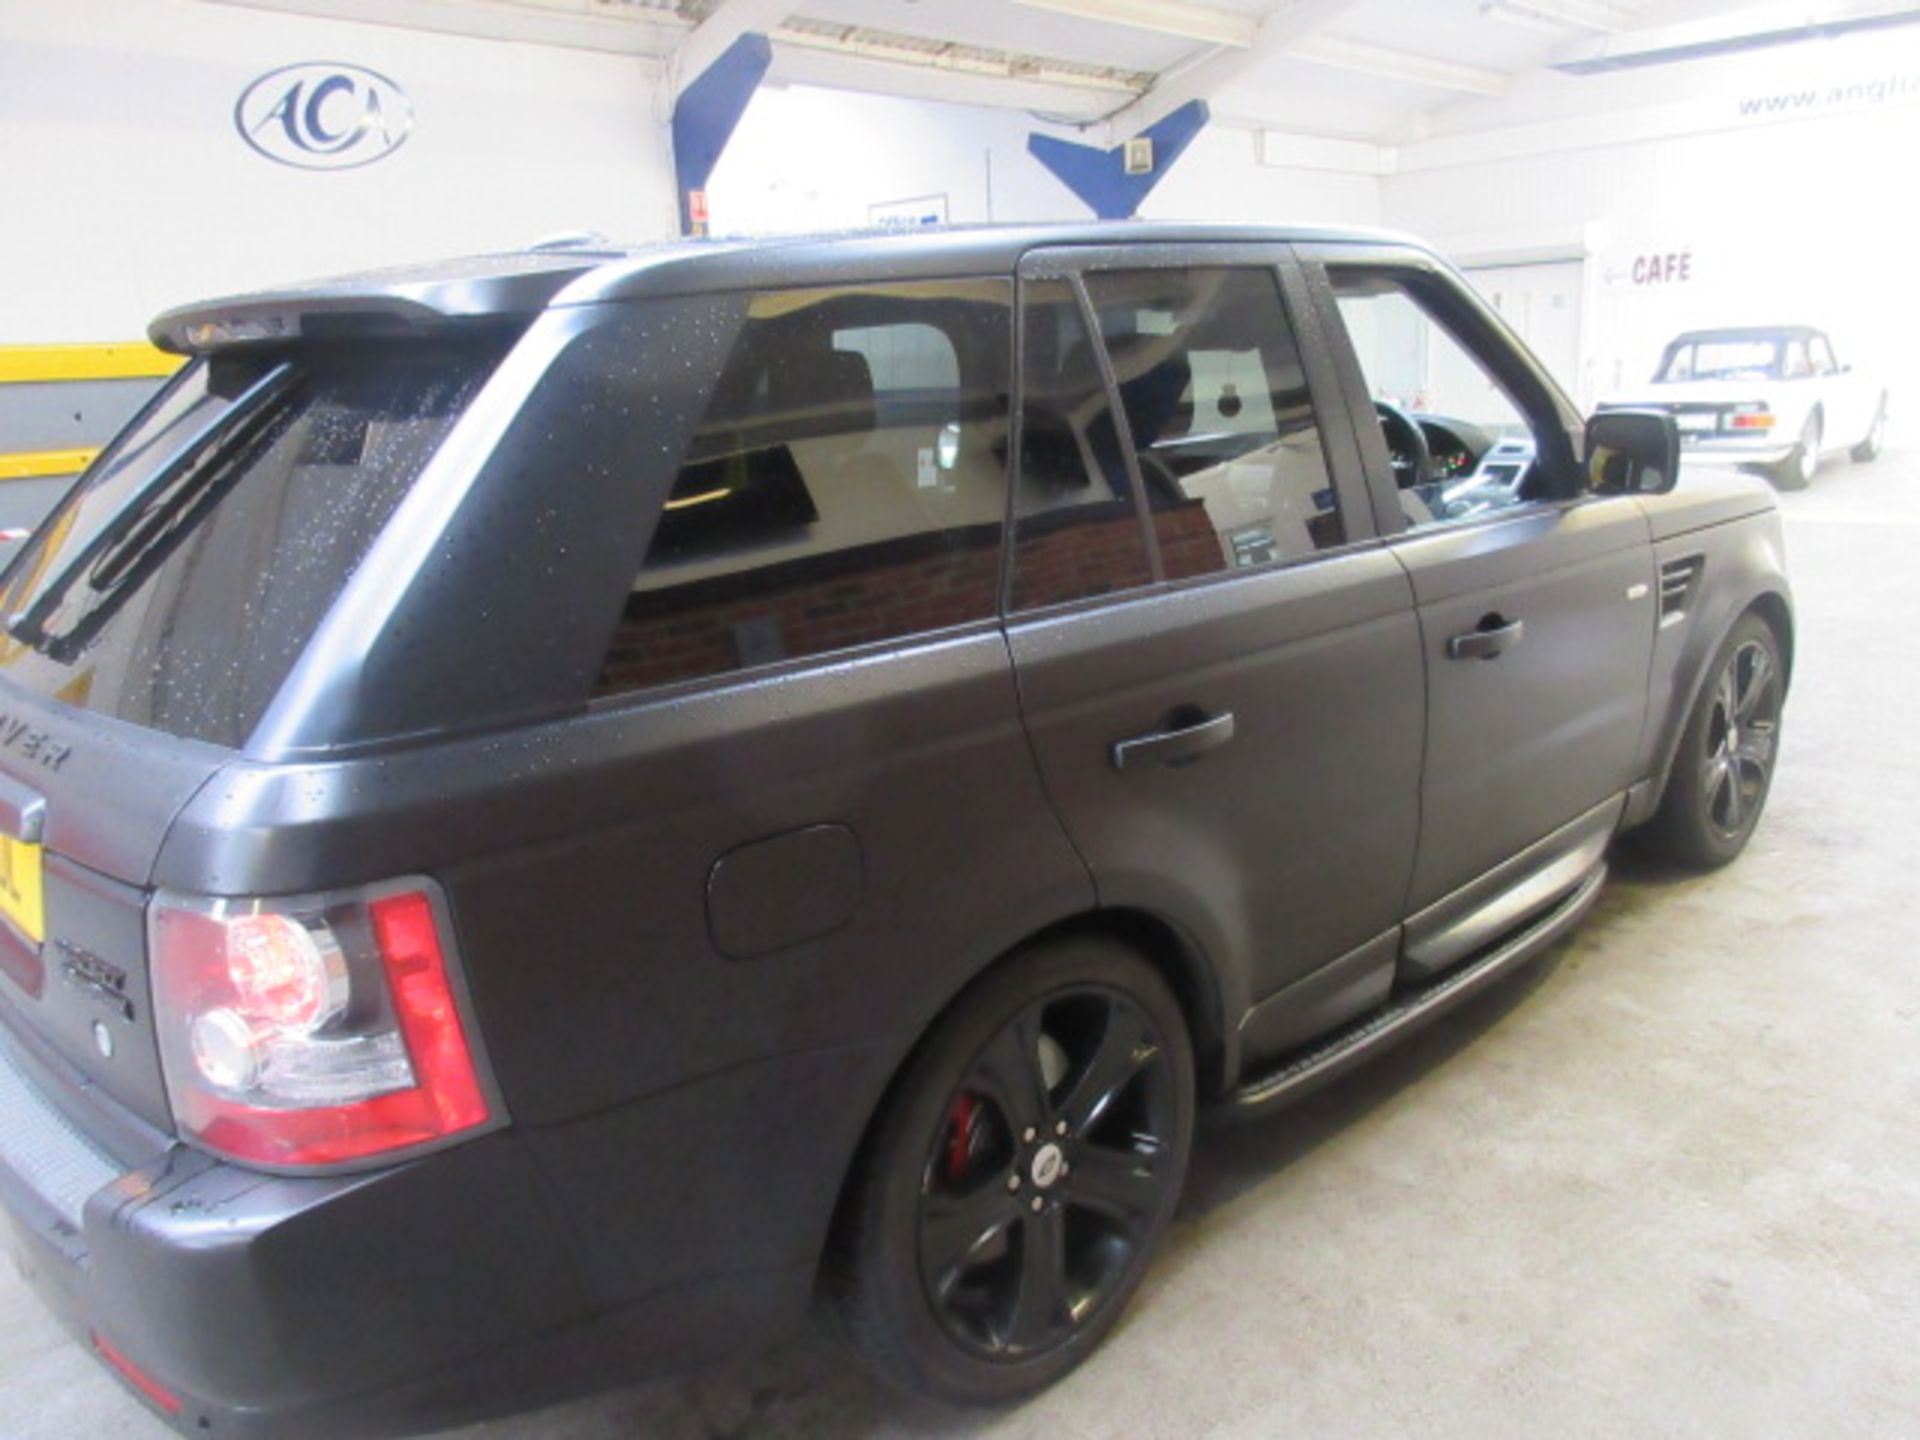 11 11 Range Rover Sp HSE - Image 2 of 14